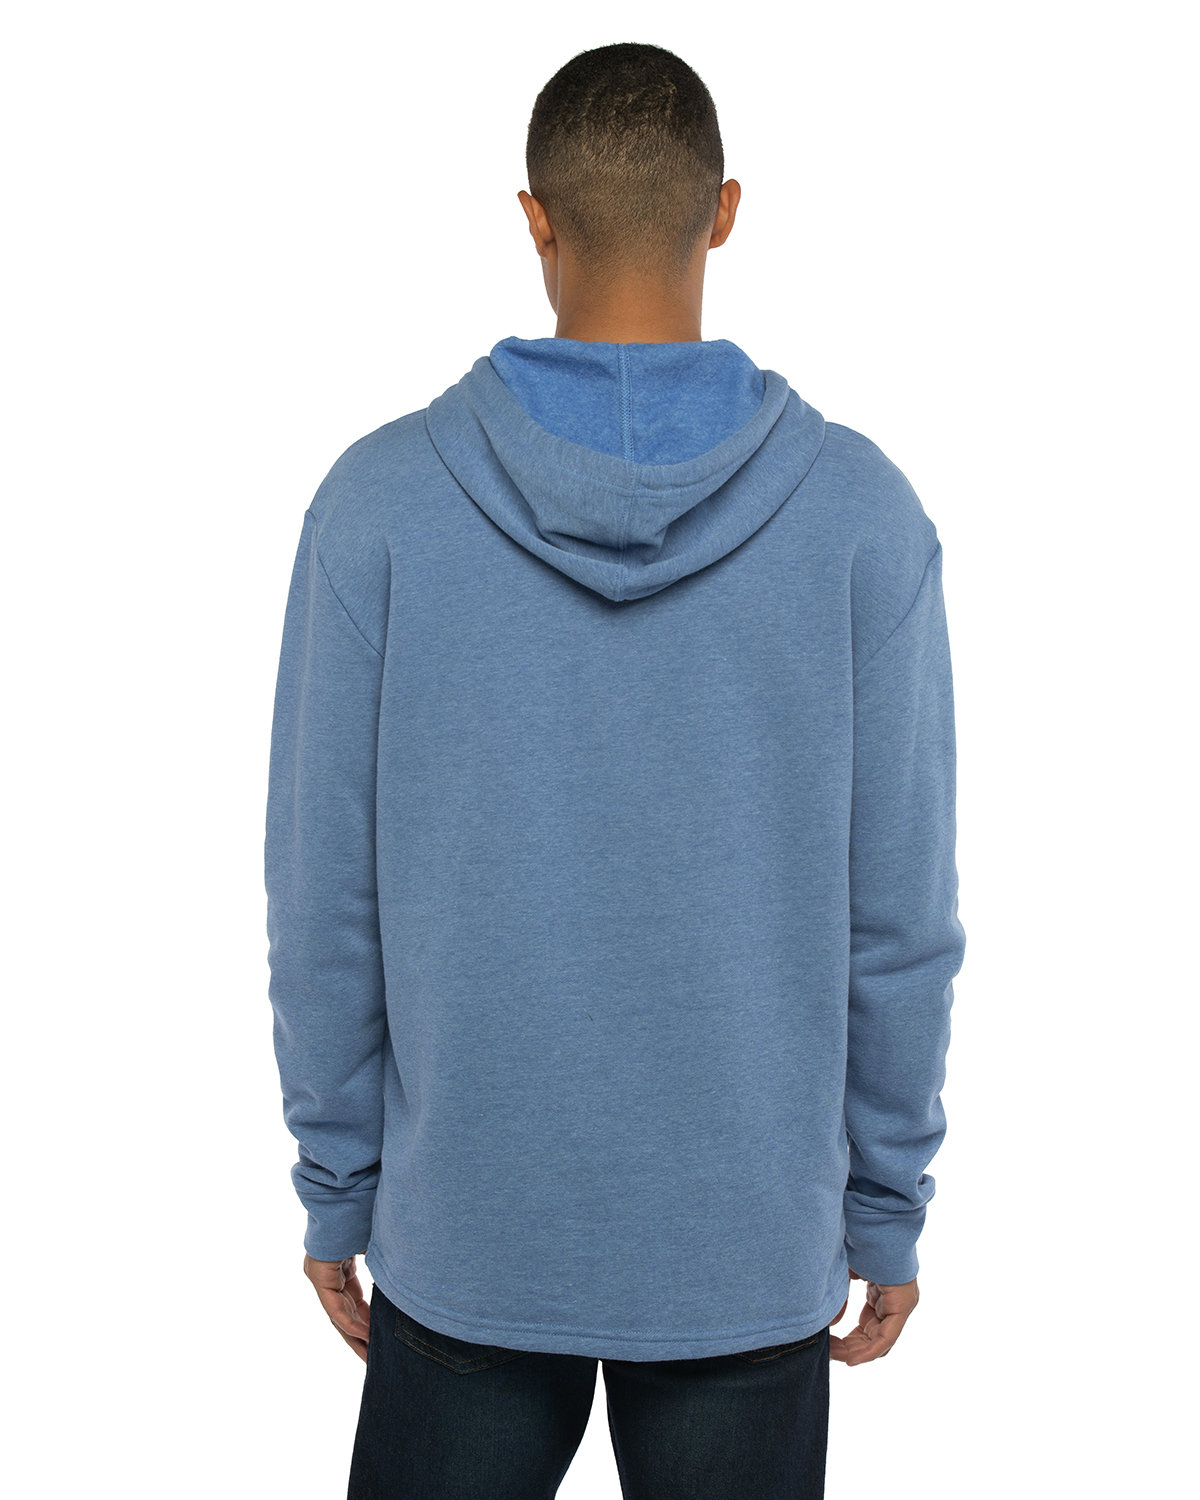 Next Level Apparel Adult PCH Pullover Hoodie | alphabroder